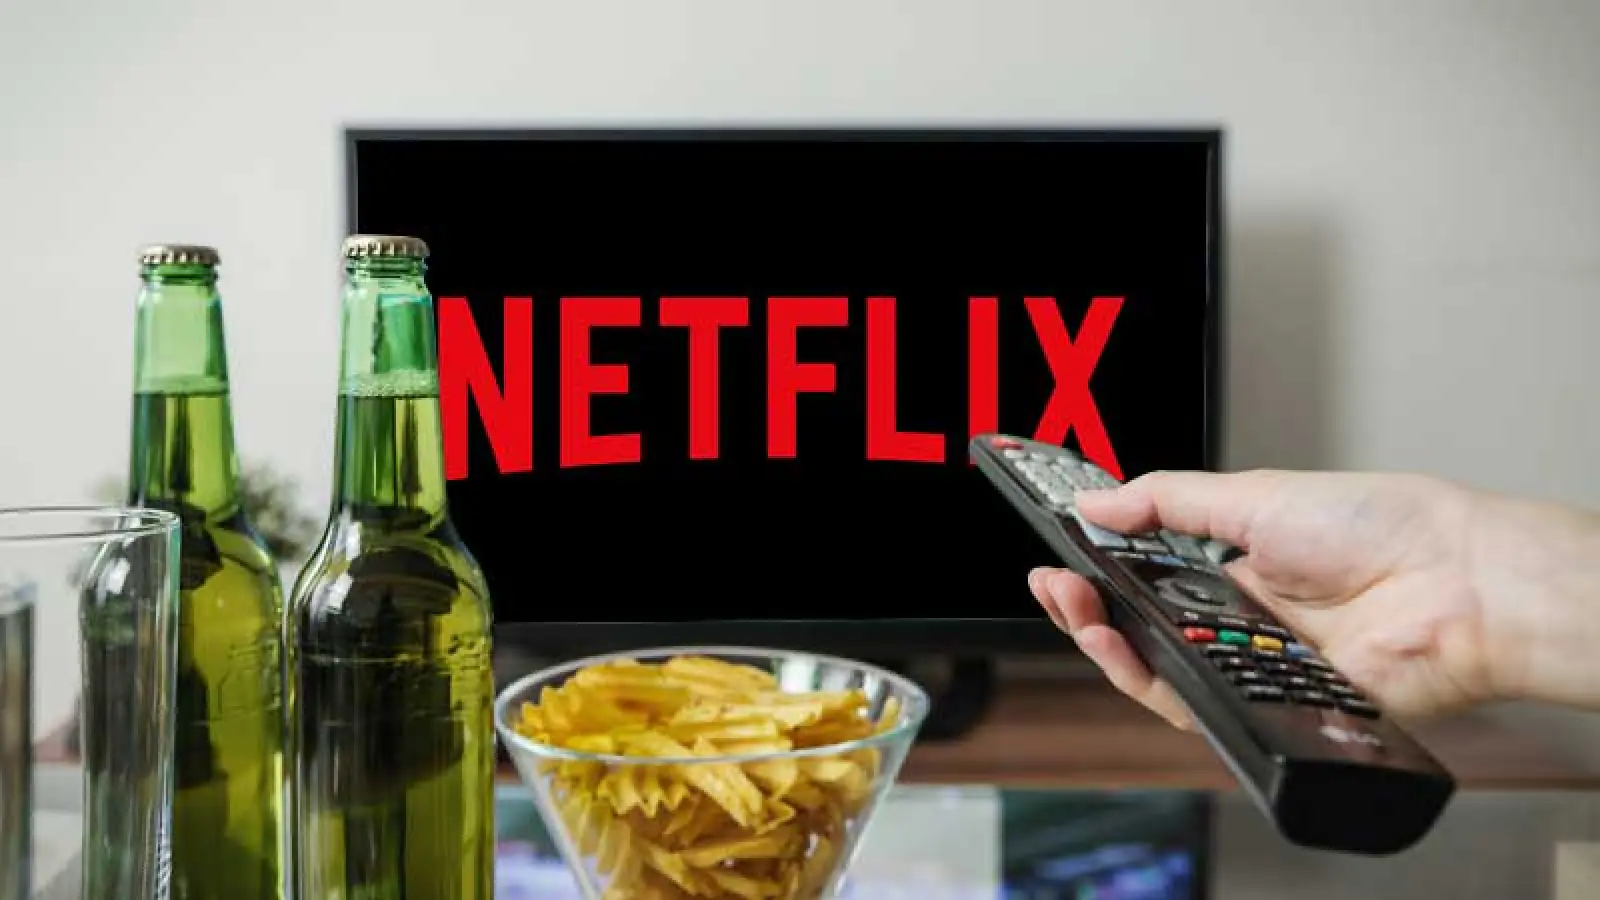 Want to download your favorite show or movie on Netflix; Just follow these steps and the work will be done